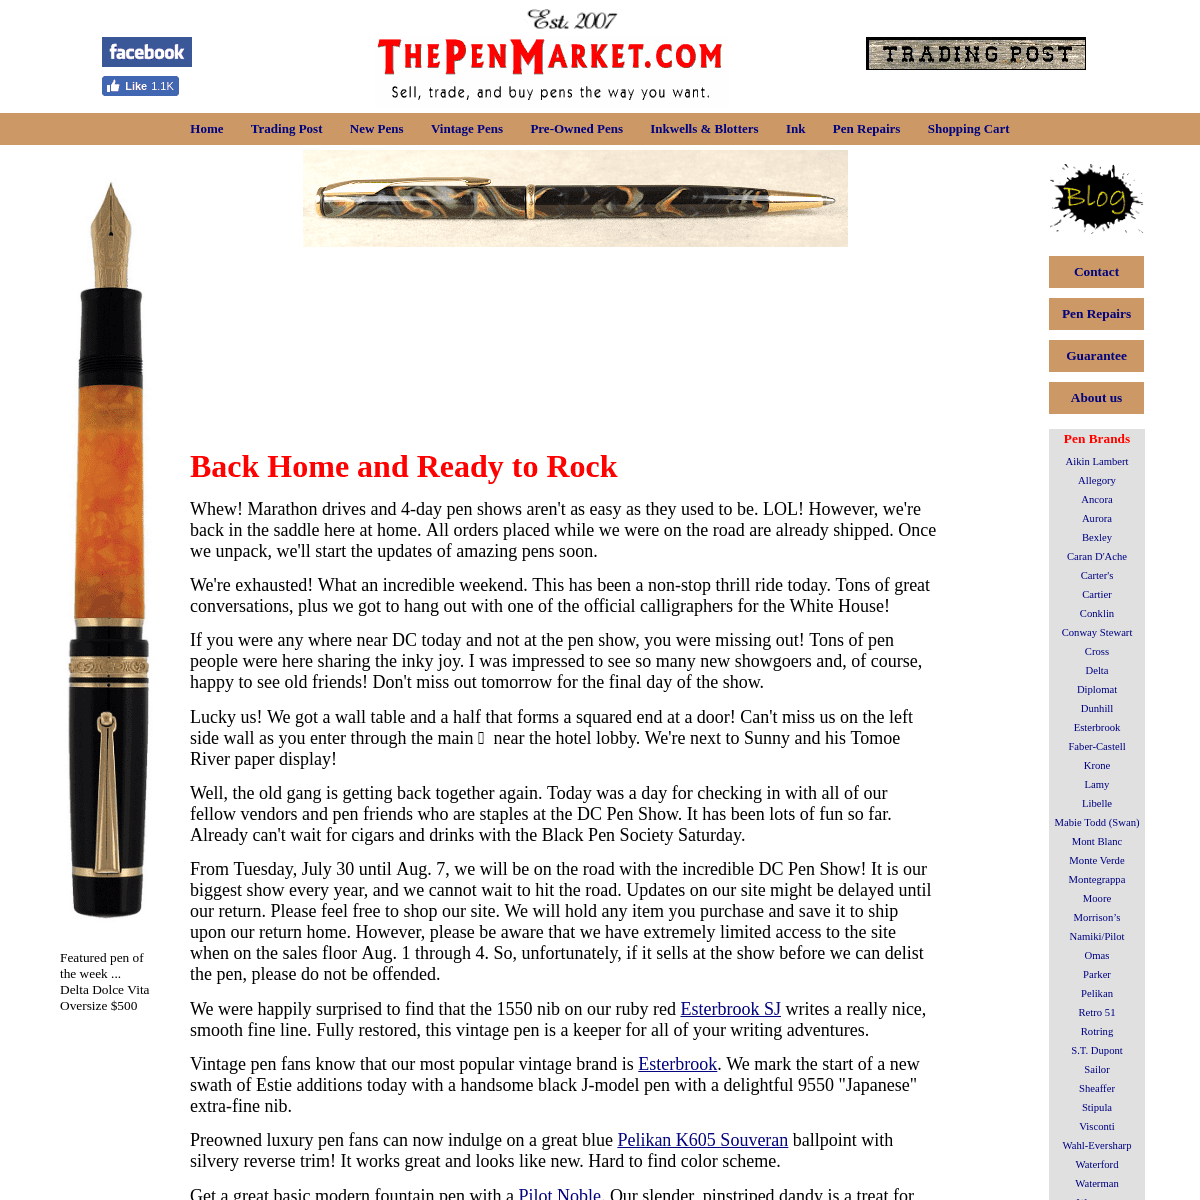 A complete backup of thepenmarket.com